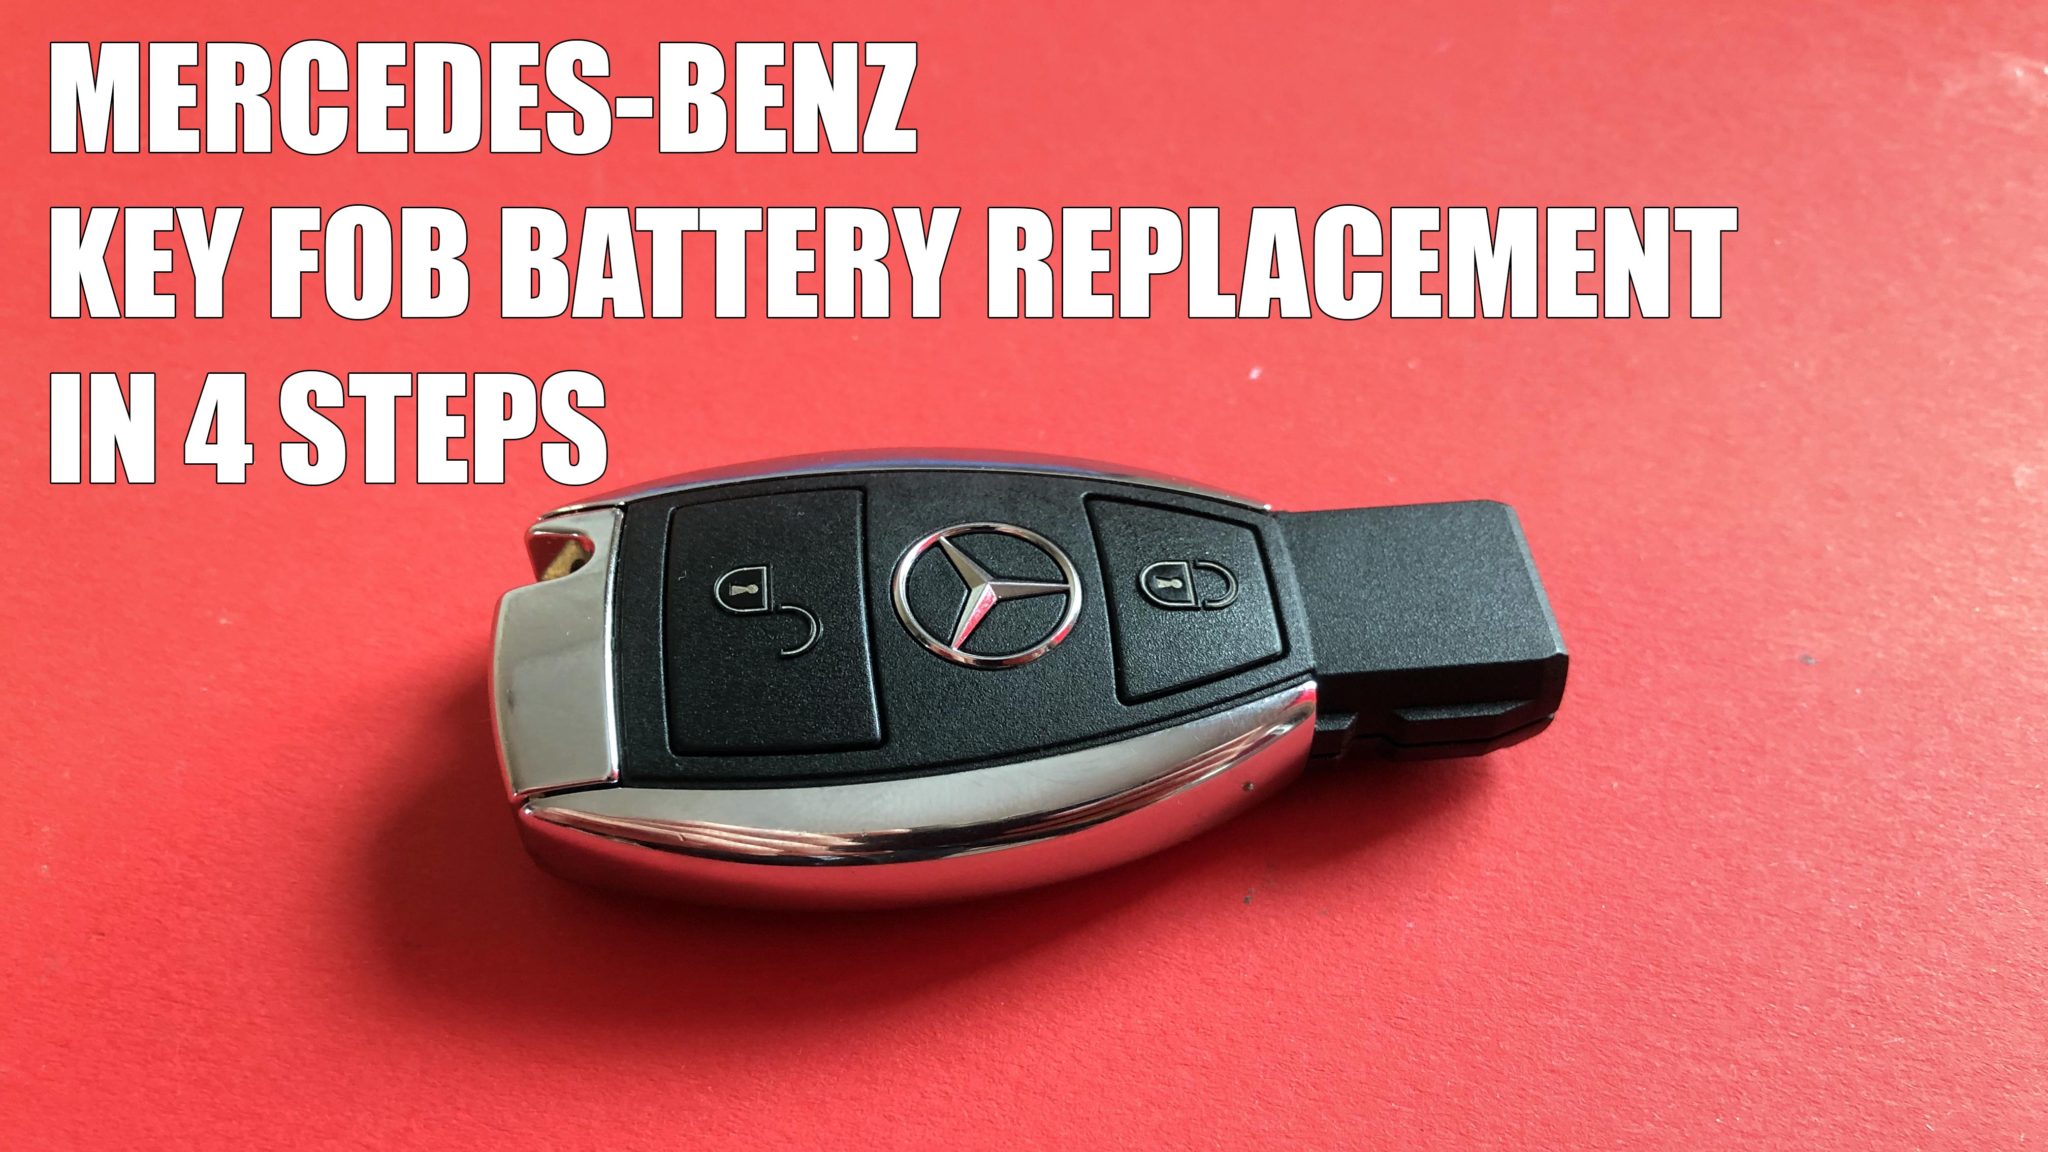 How to find Mercedes Key Fob Battery replacement service near us?